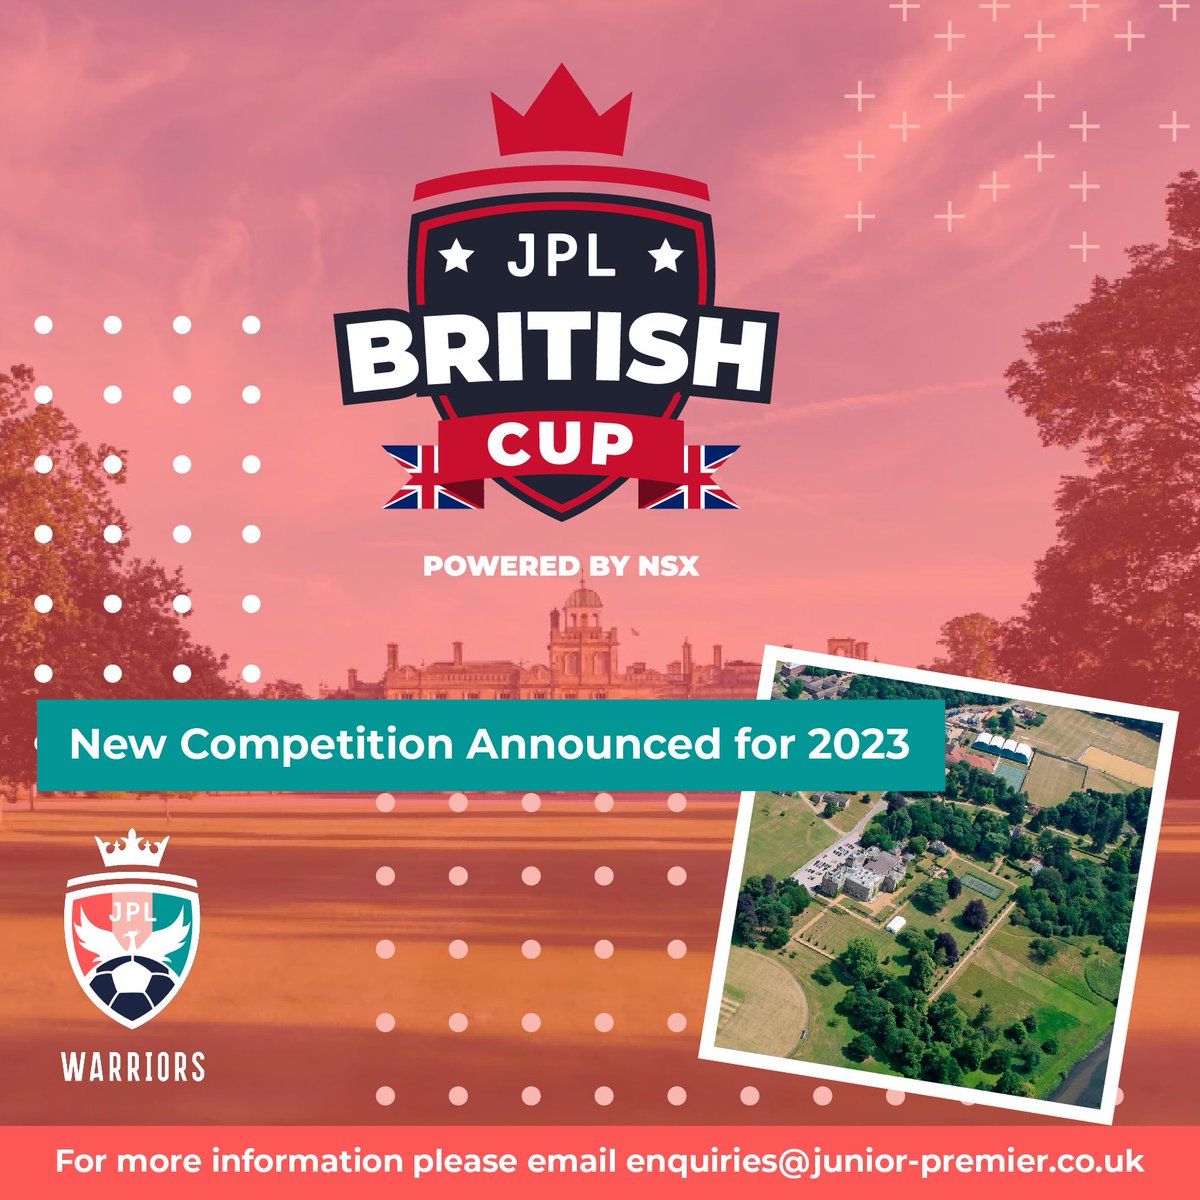 🏆 The 𝗝𝗣𝗟 𝗕𝗿𝗶𝘁𝗶𝘀𝗵 𝗖𝘂𝗽 is a new tournament for girls teams in 2023!  

Visit the link below to register your place at the inaugural event. 

✍️ form.jotform.com/223272803304346

#JPLBritishCup | @nsxgroup